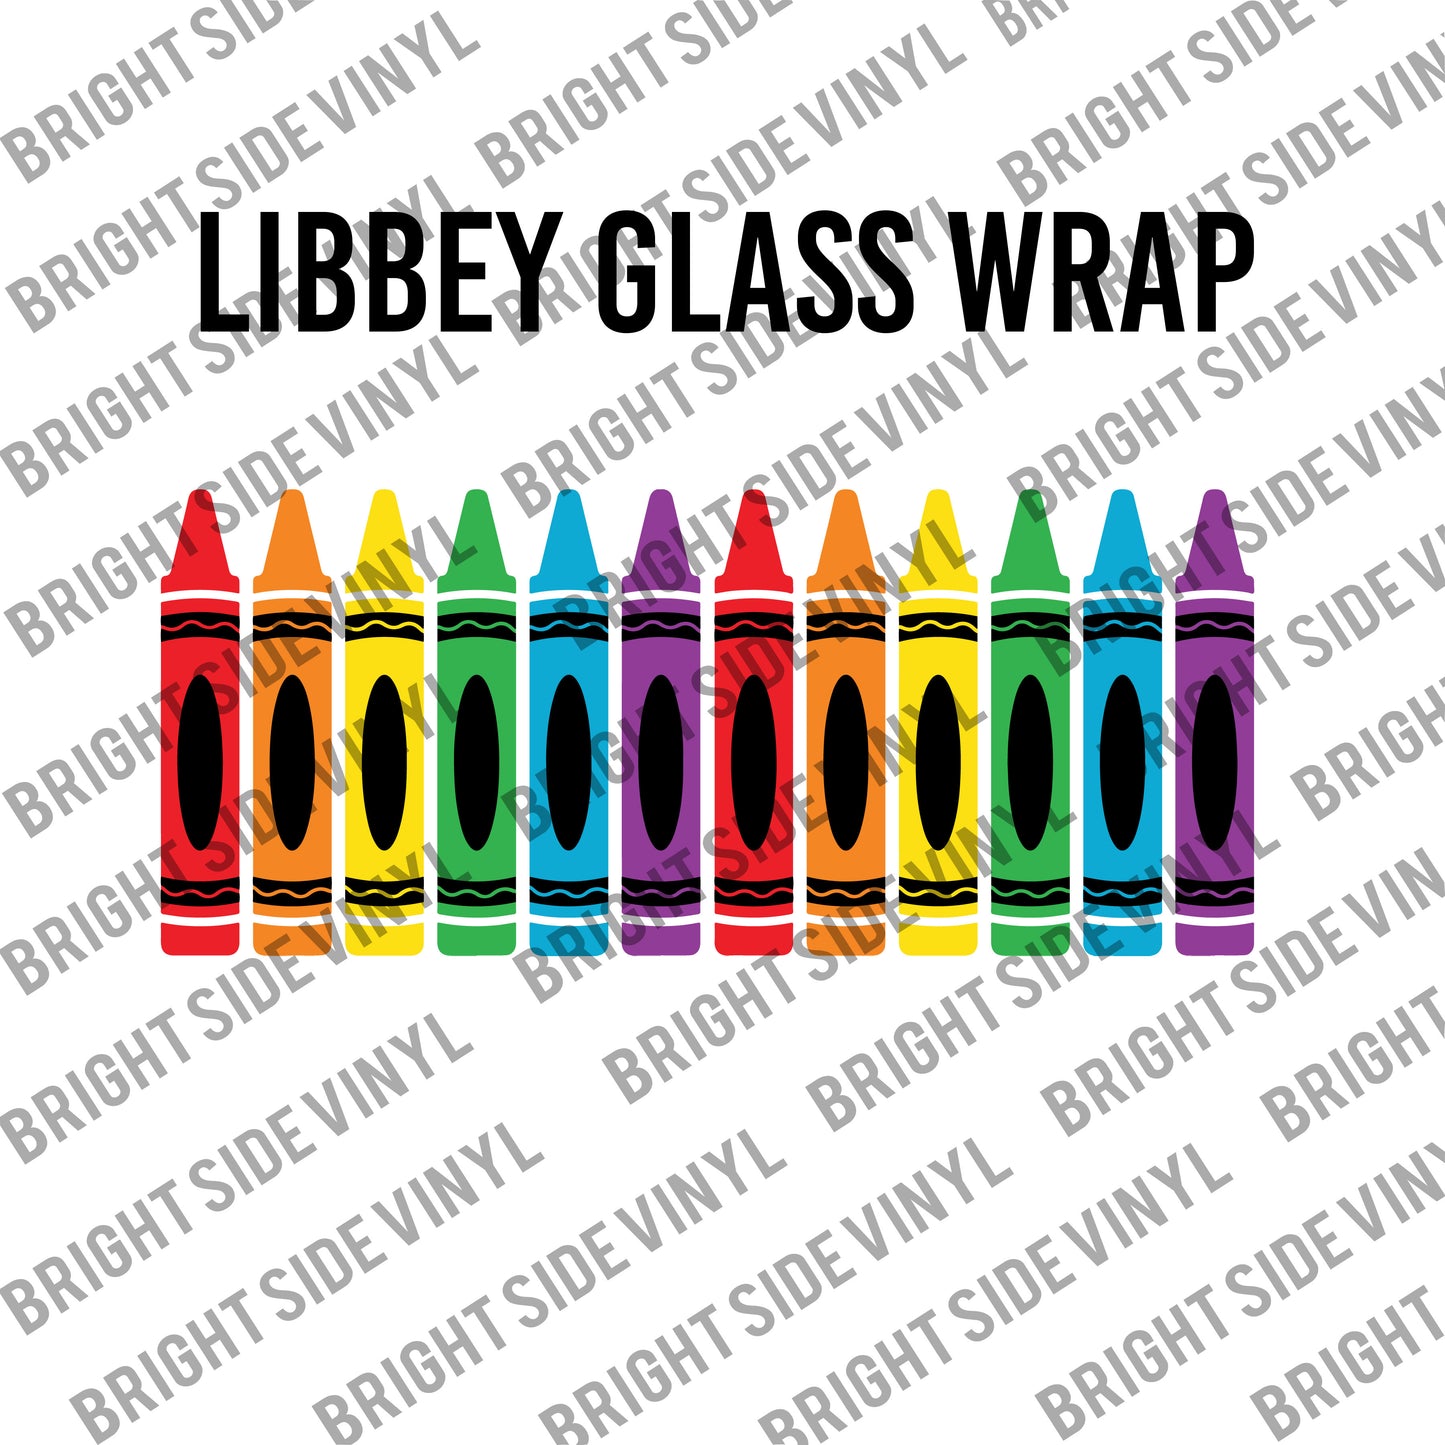 Crayons #2 (Libbey Glass Wrap)